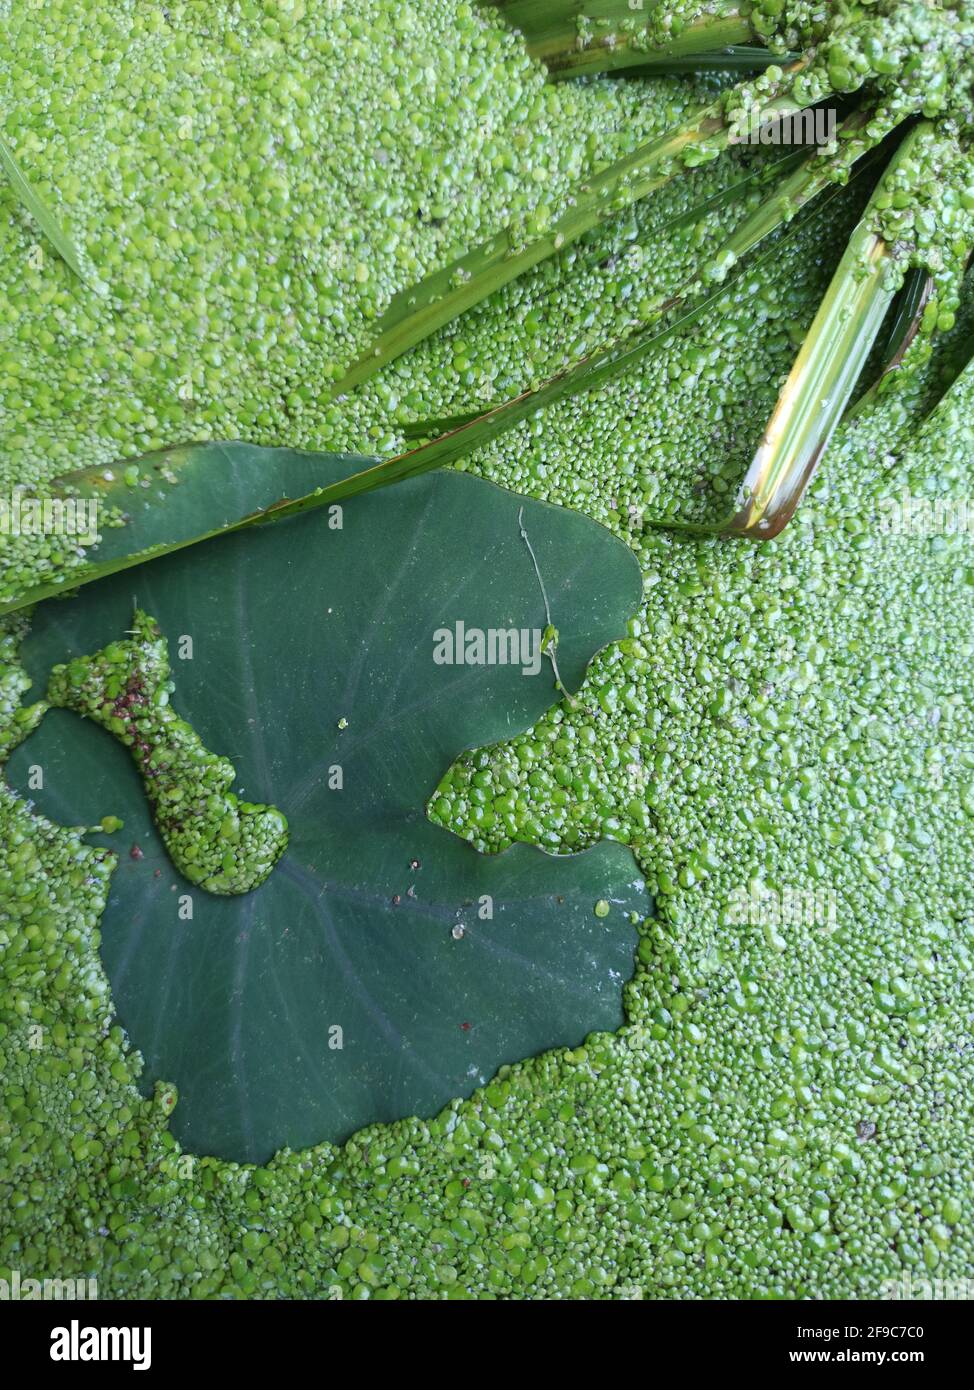 Shot of green coccidae on leaves Stock Photo